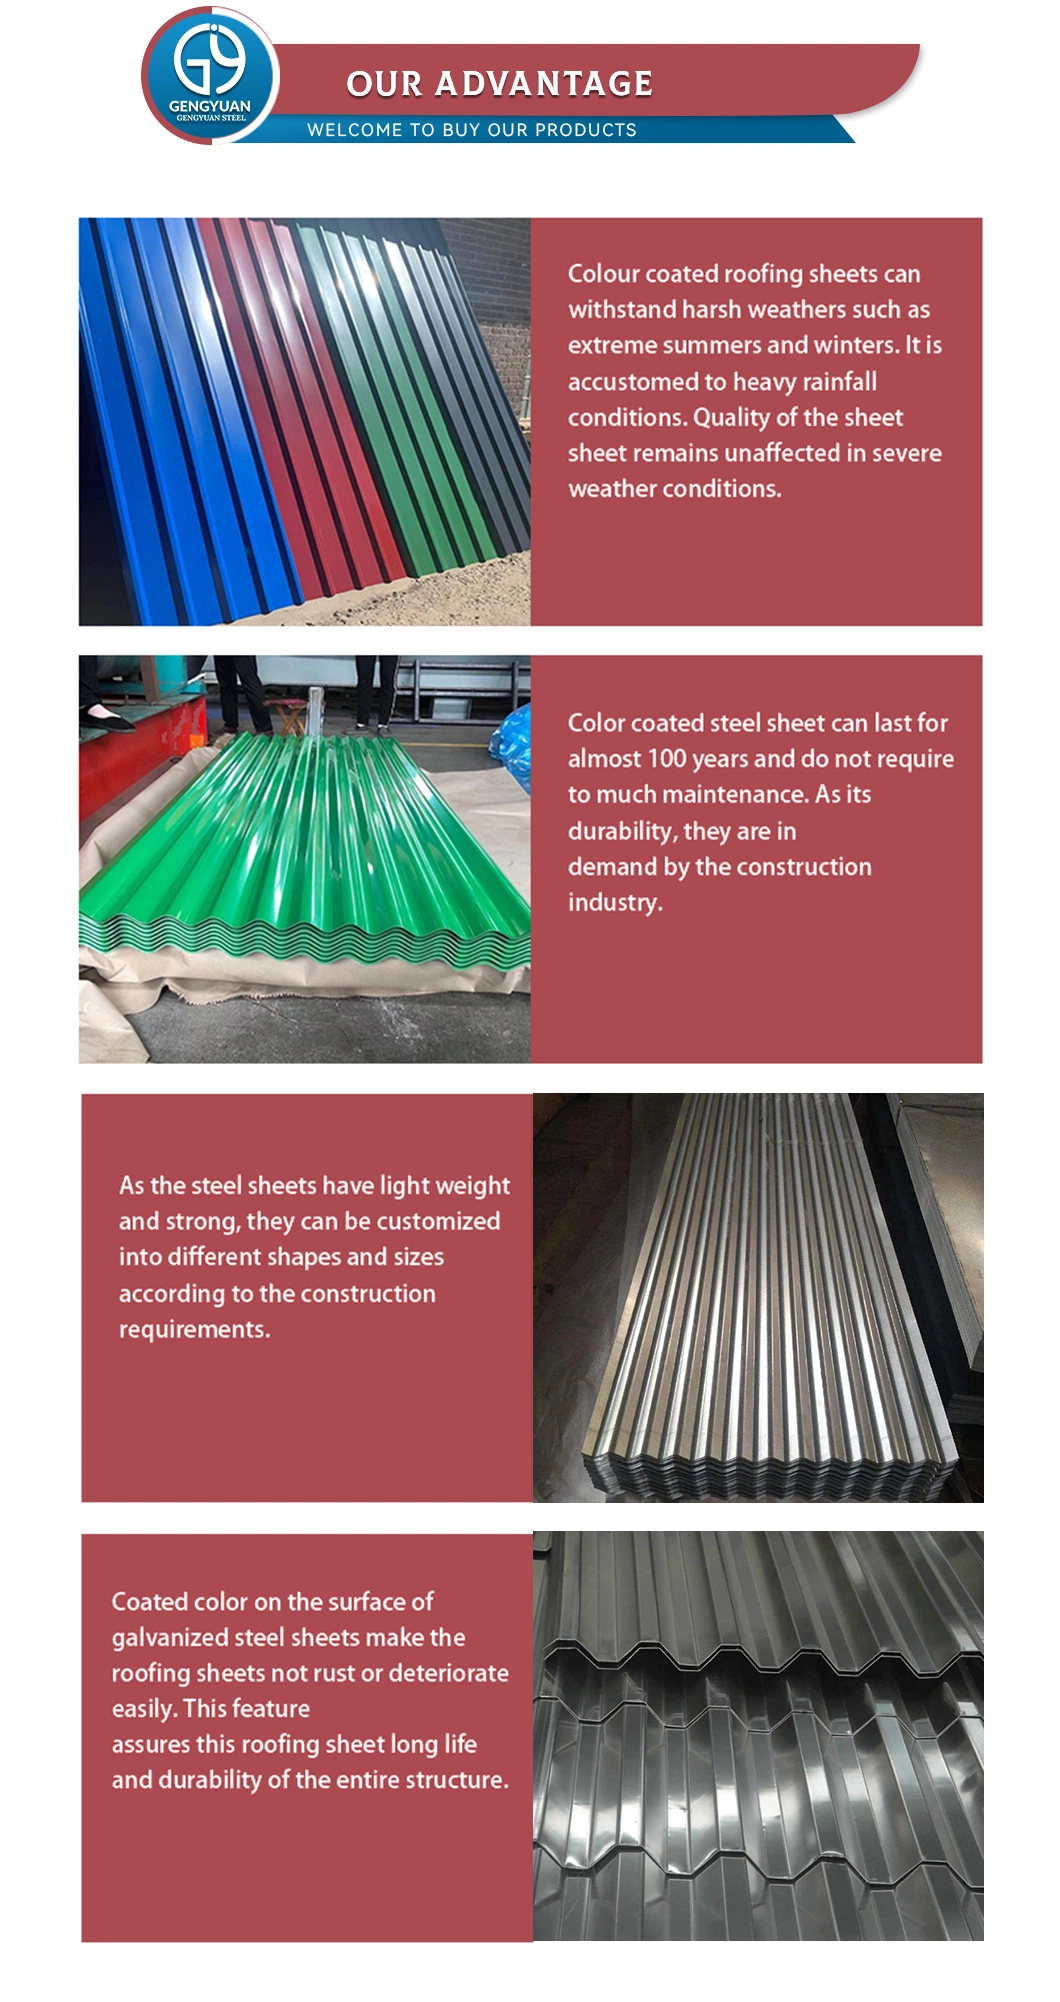 China Shandong Factory 0.3mm 0.4mm Building Material PPGI Color Coated Prepainted Steel Metal Roof Sheet Price Gi Galvanized Corrugated Sheet Roofing Sheet